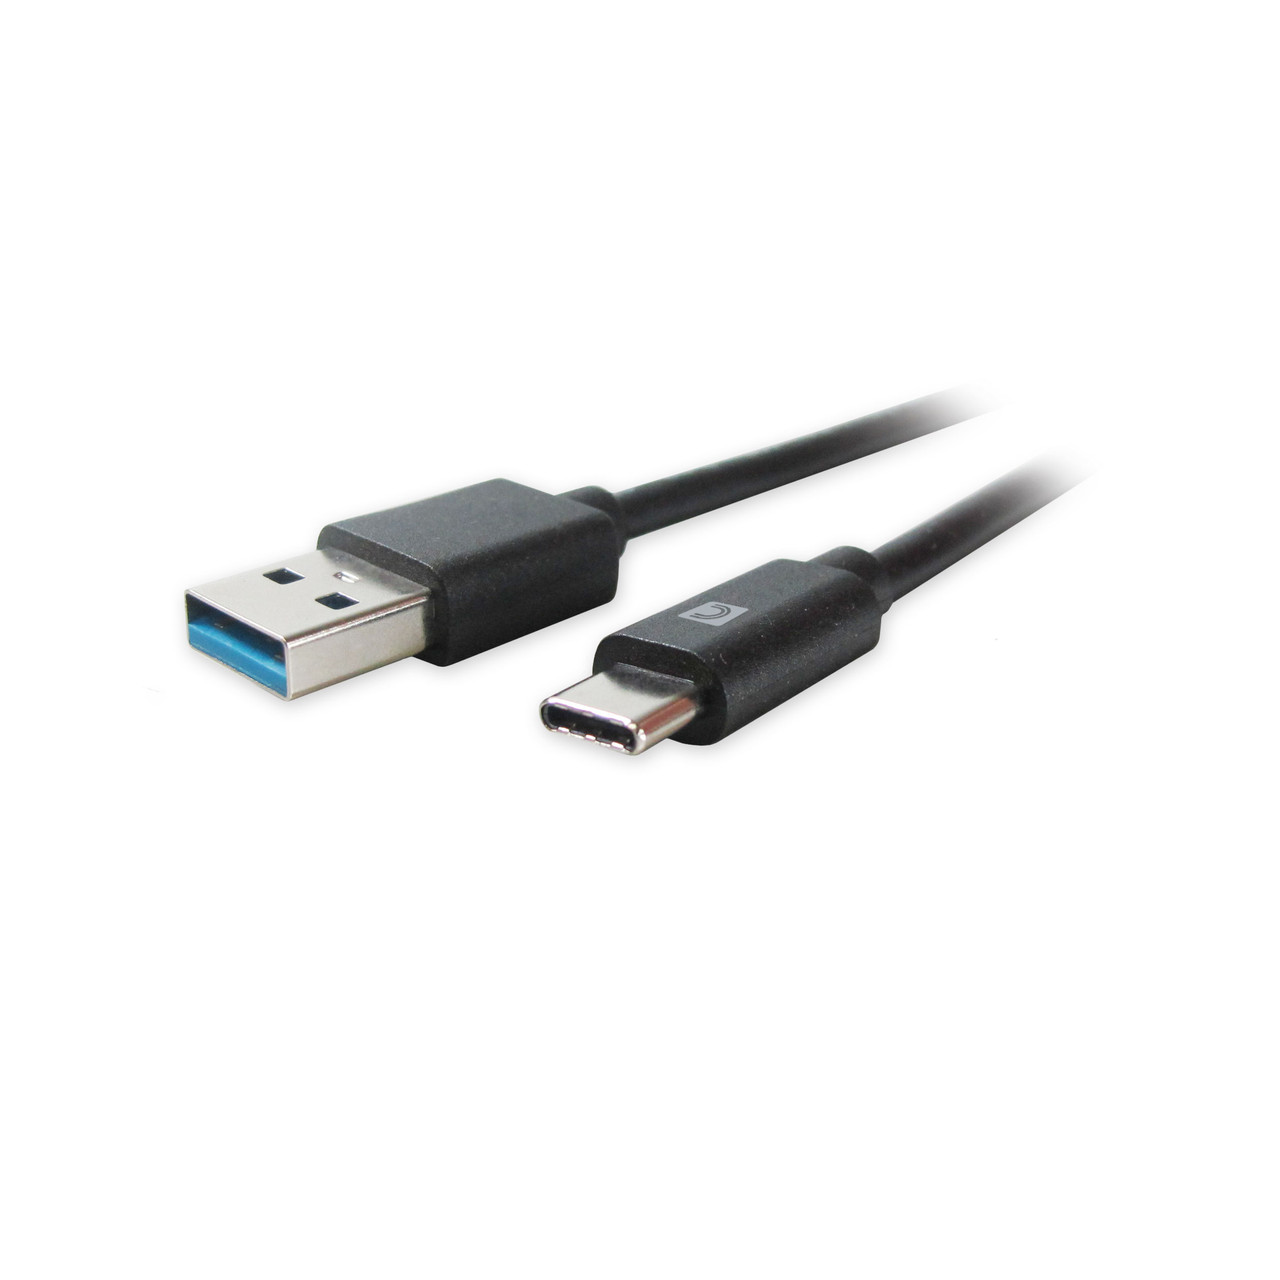 Standard Series USB-C Male to USB-A Male Cable 10ft